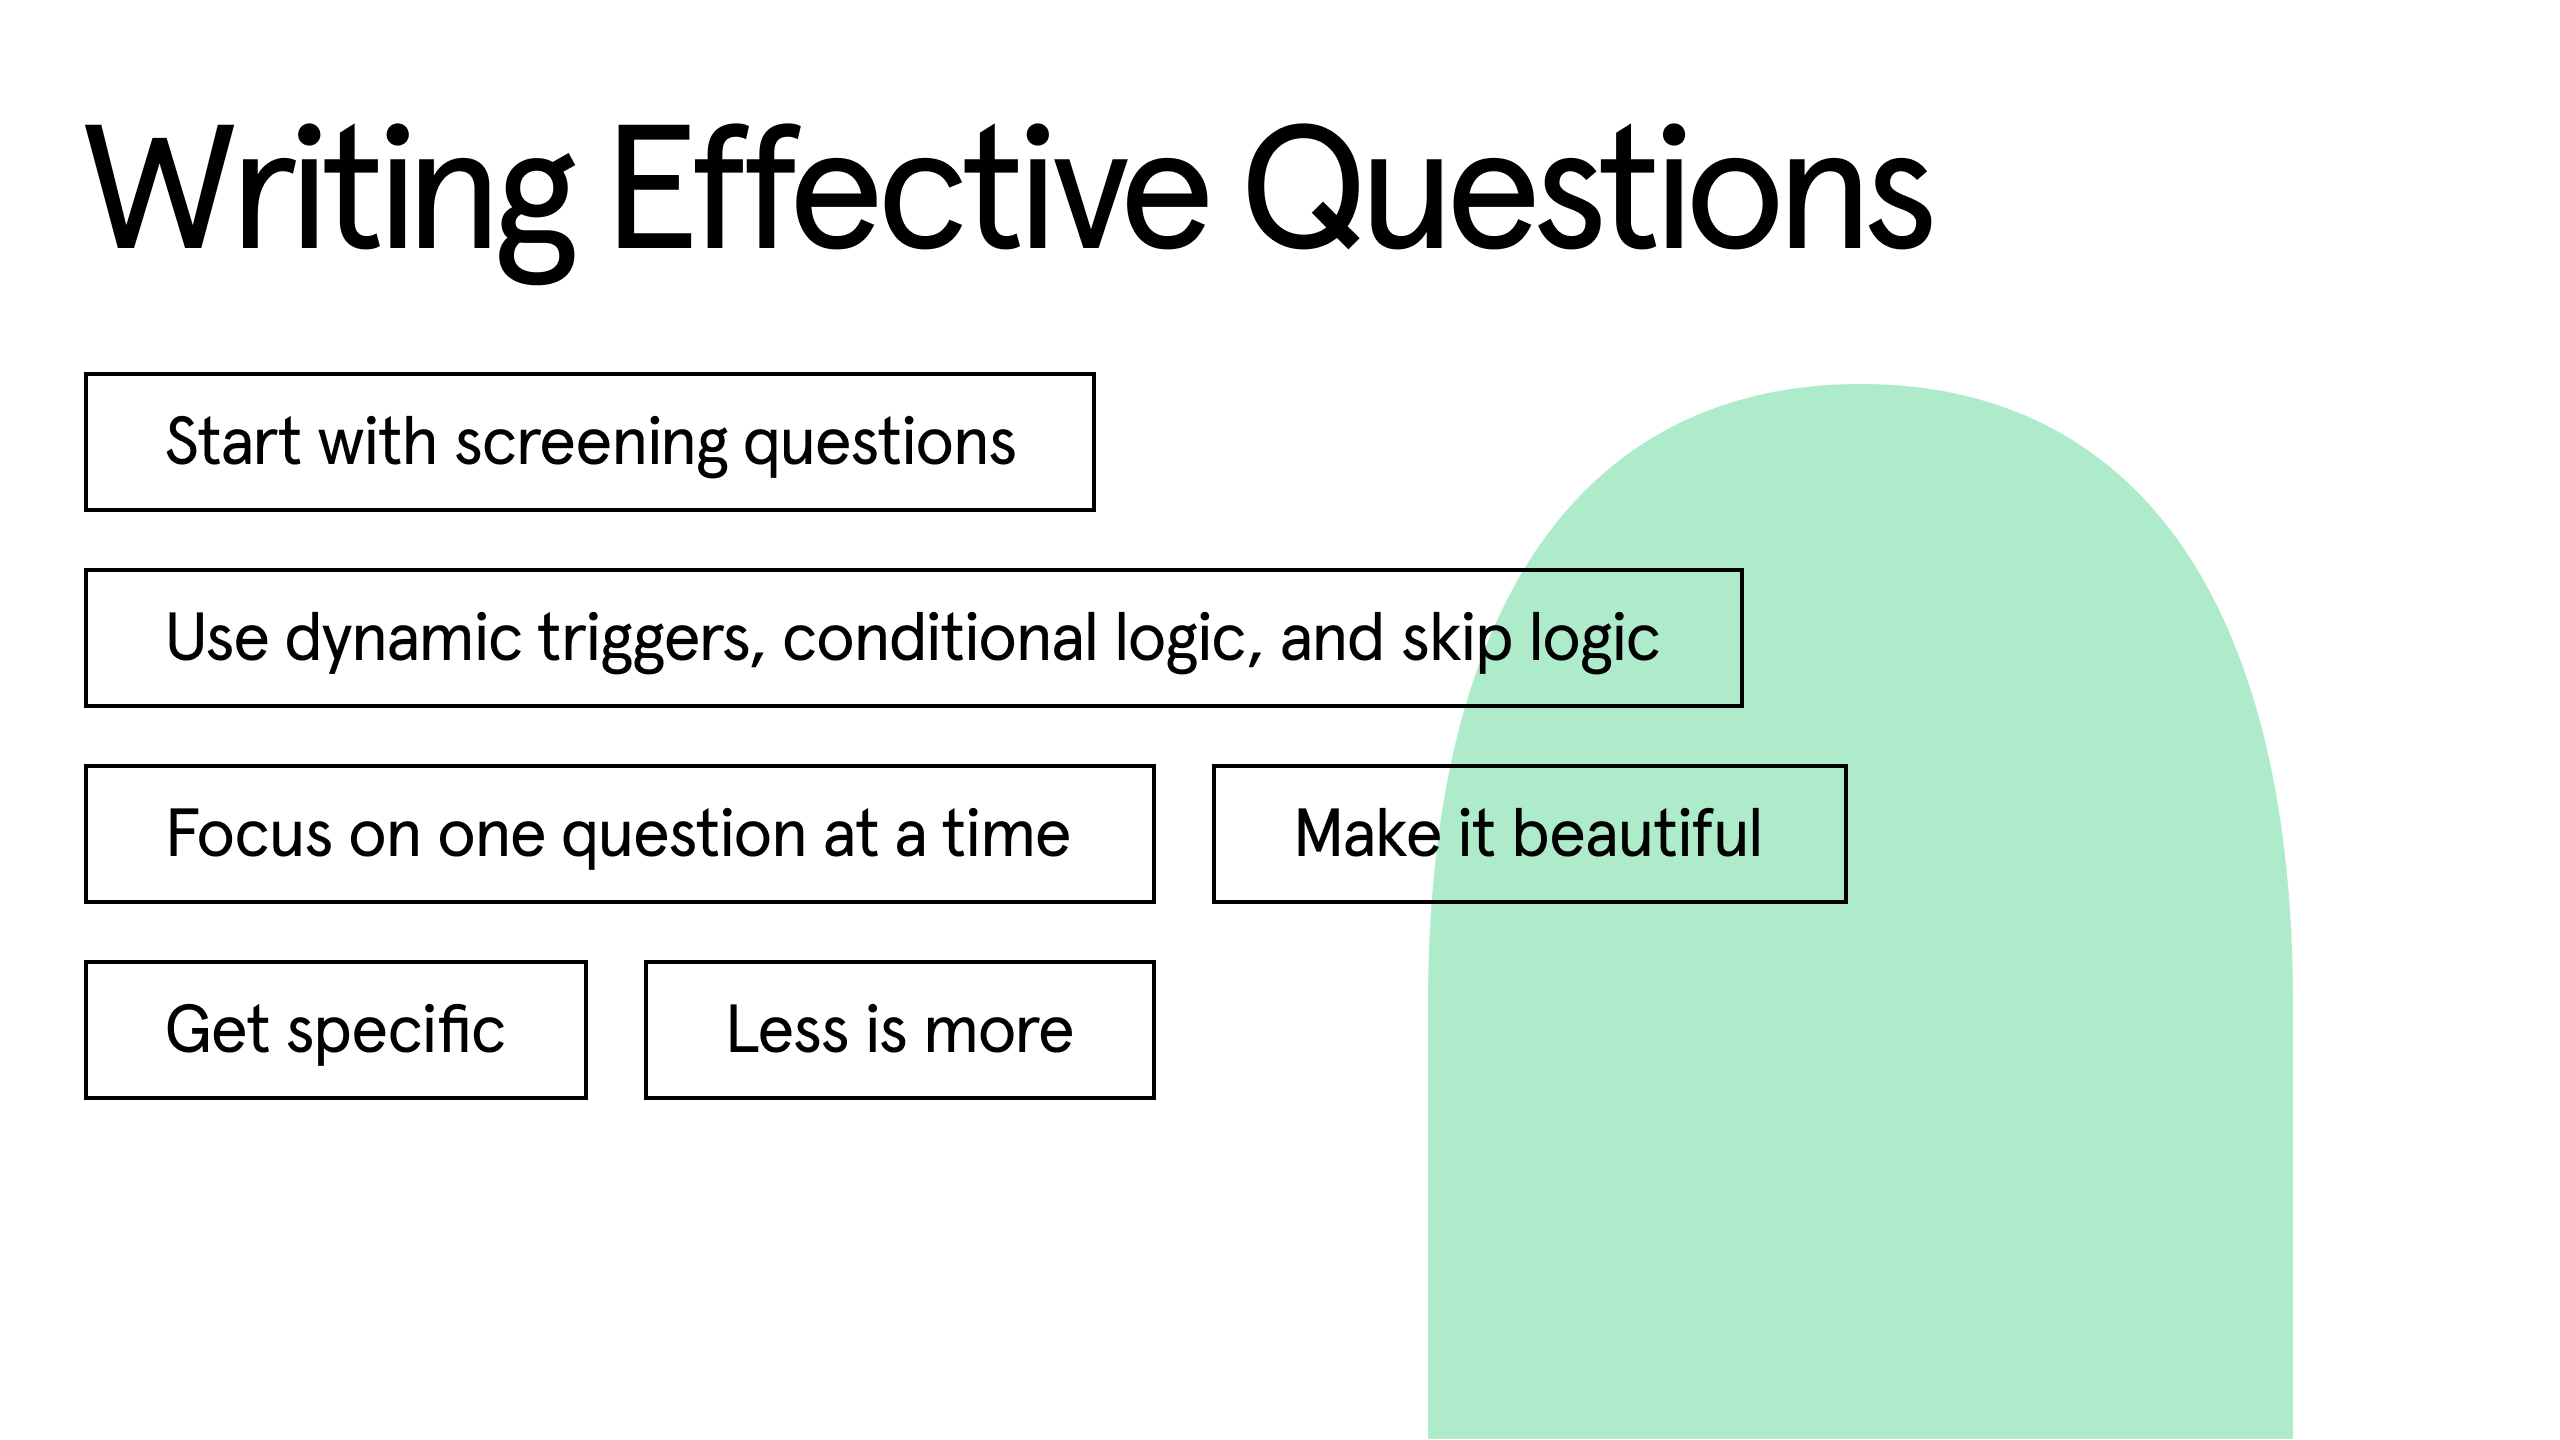 Image recaps our tips for writing effective questions.